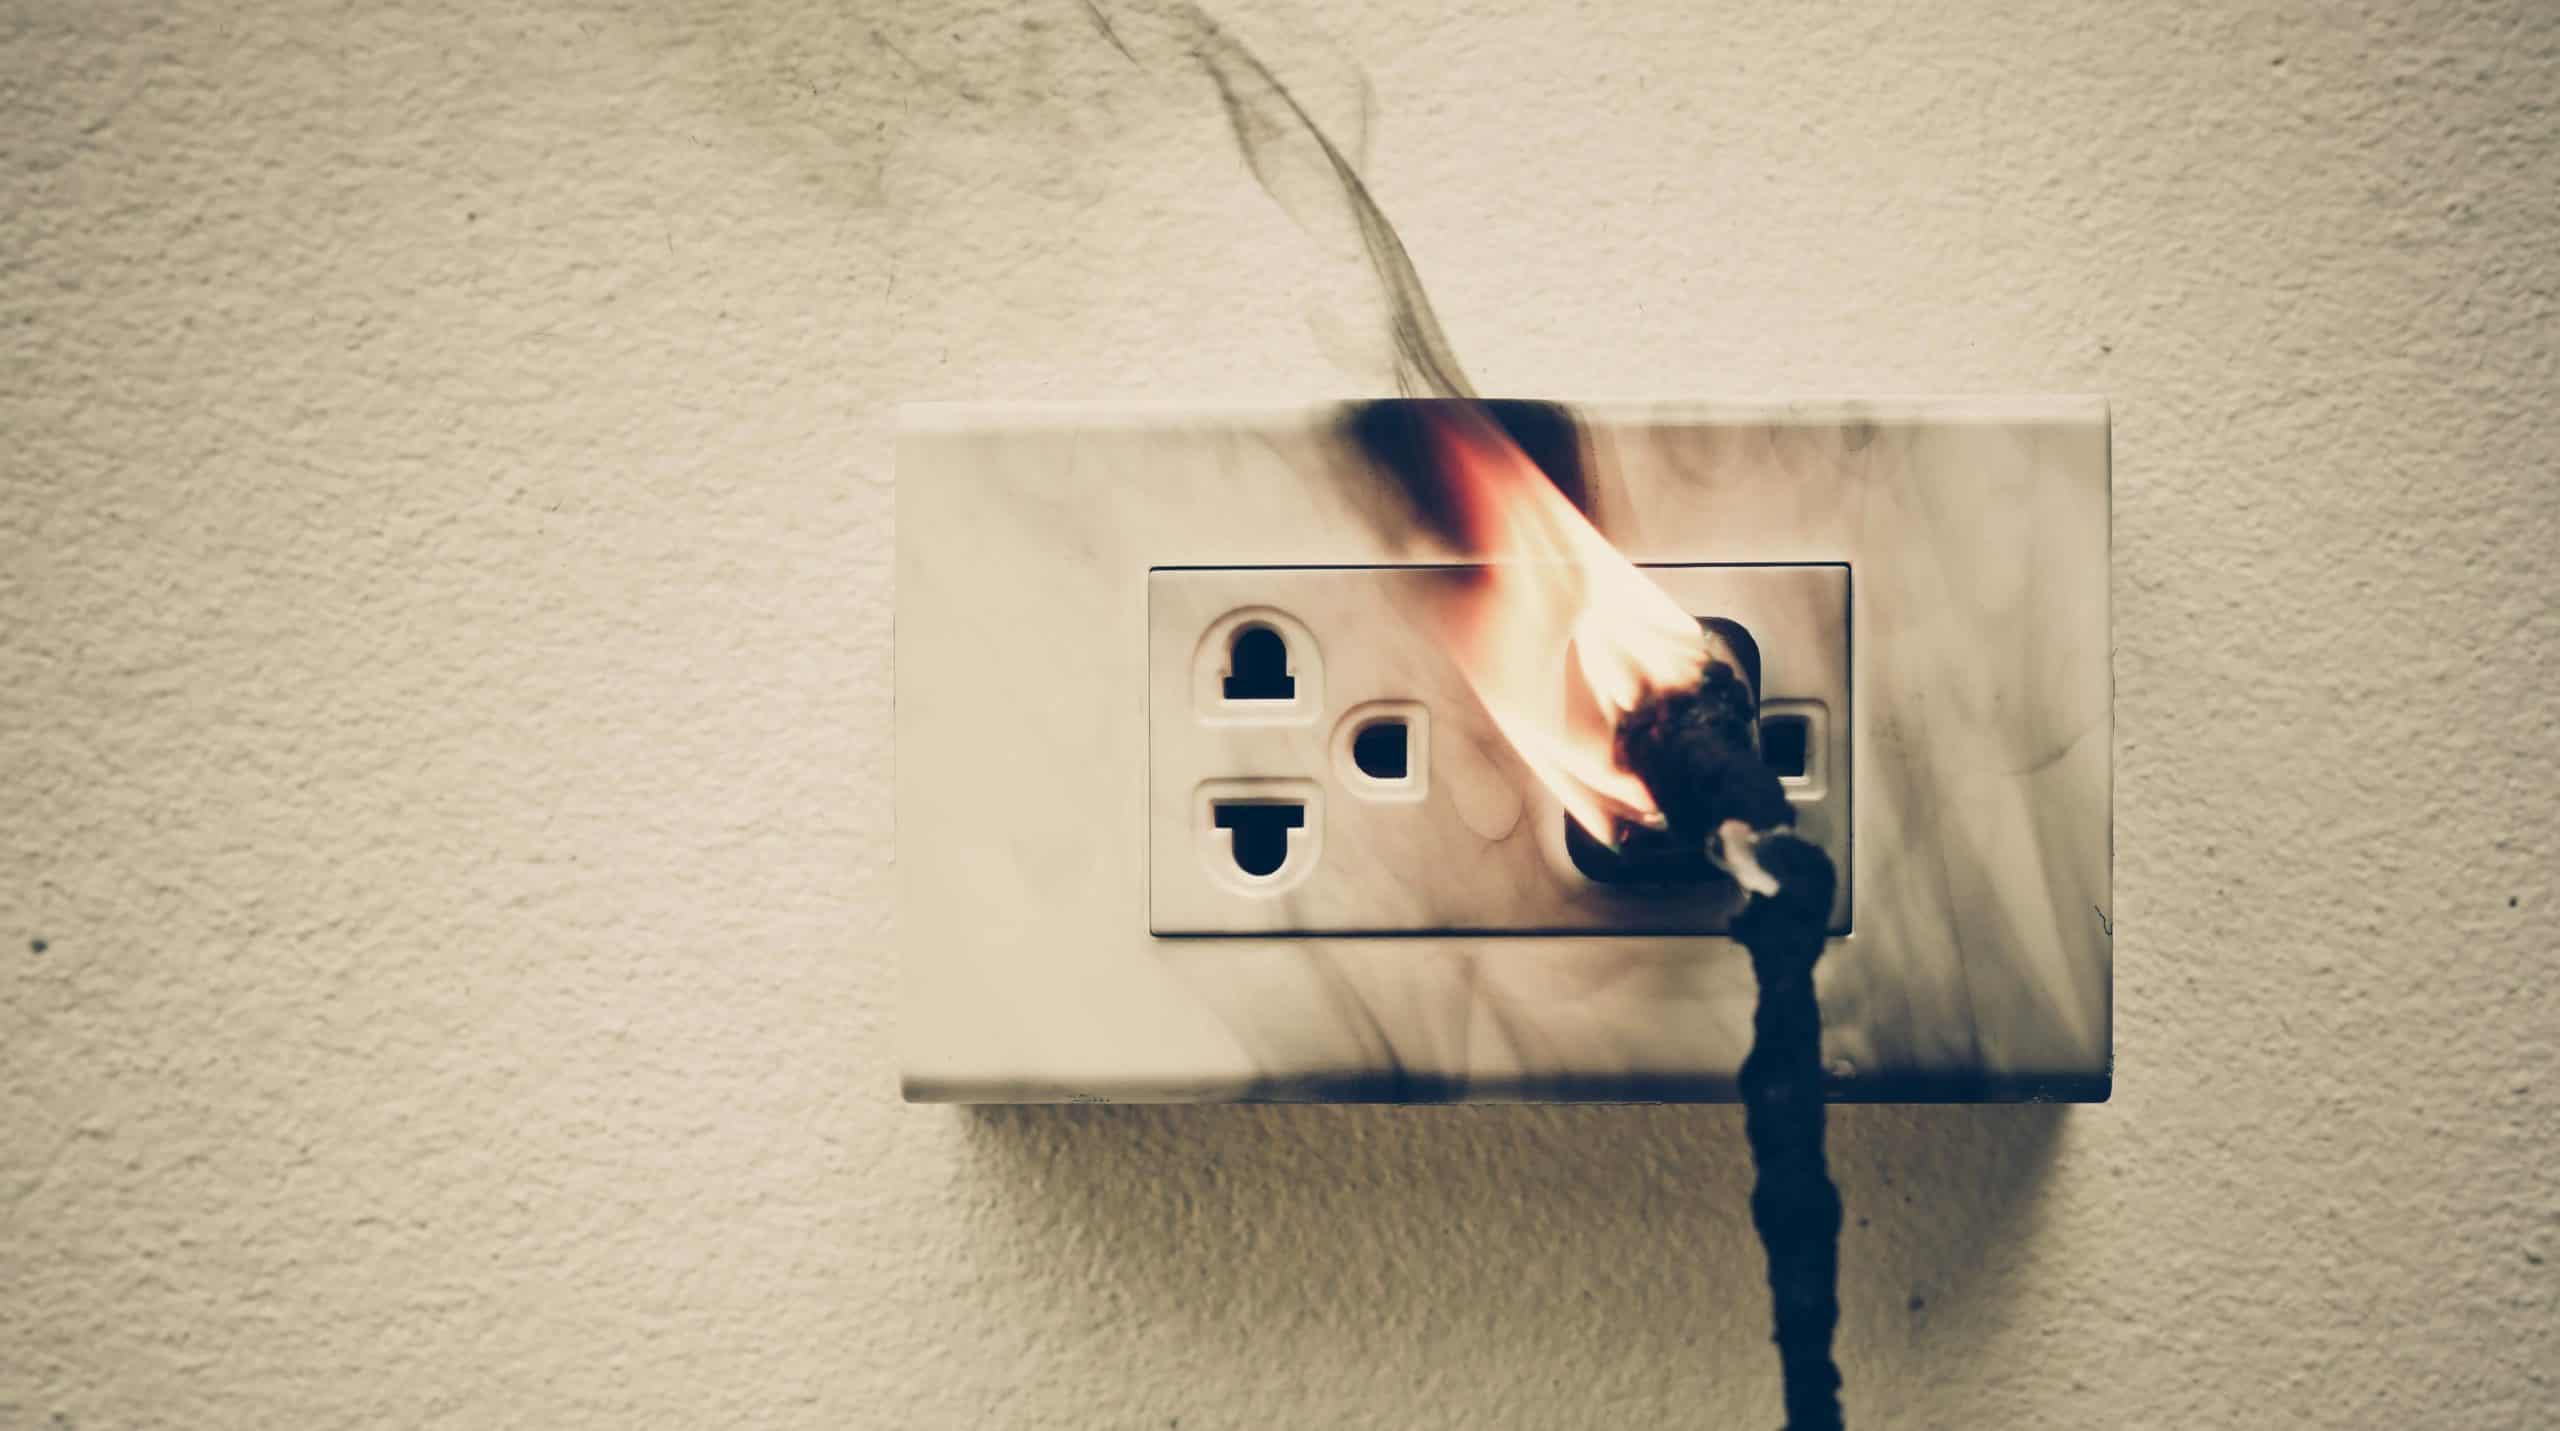 Power outlet on fire